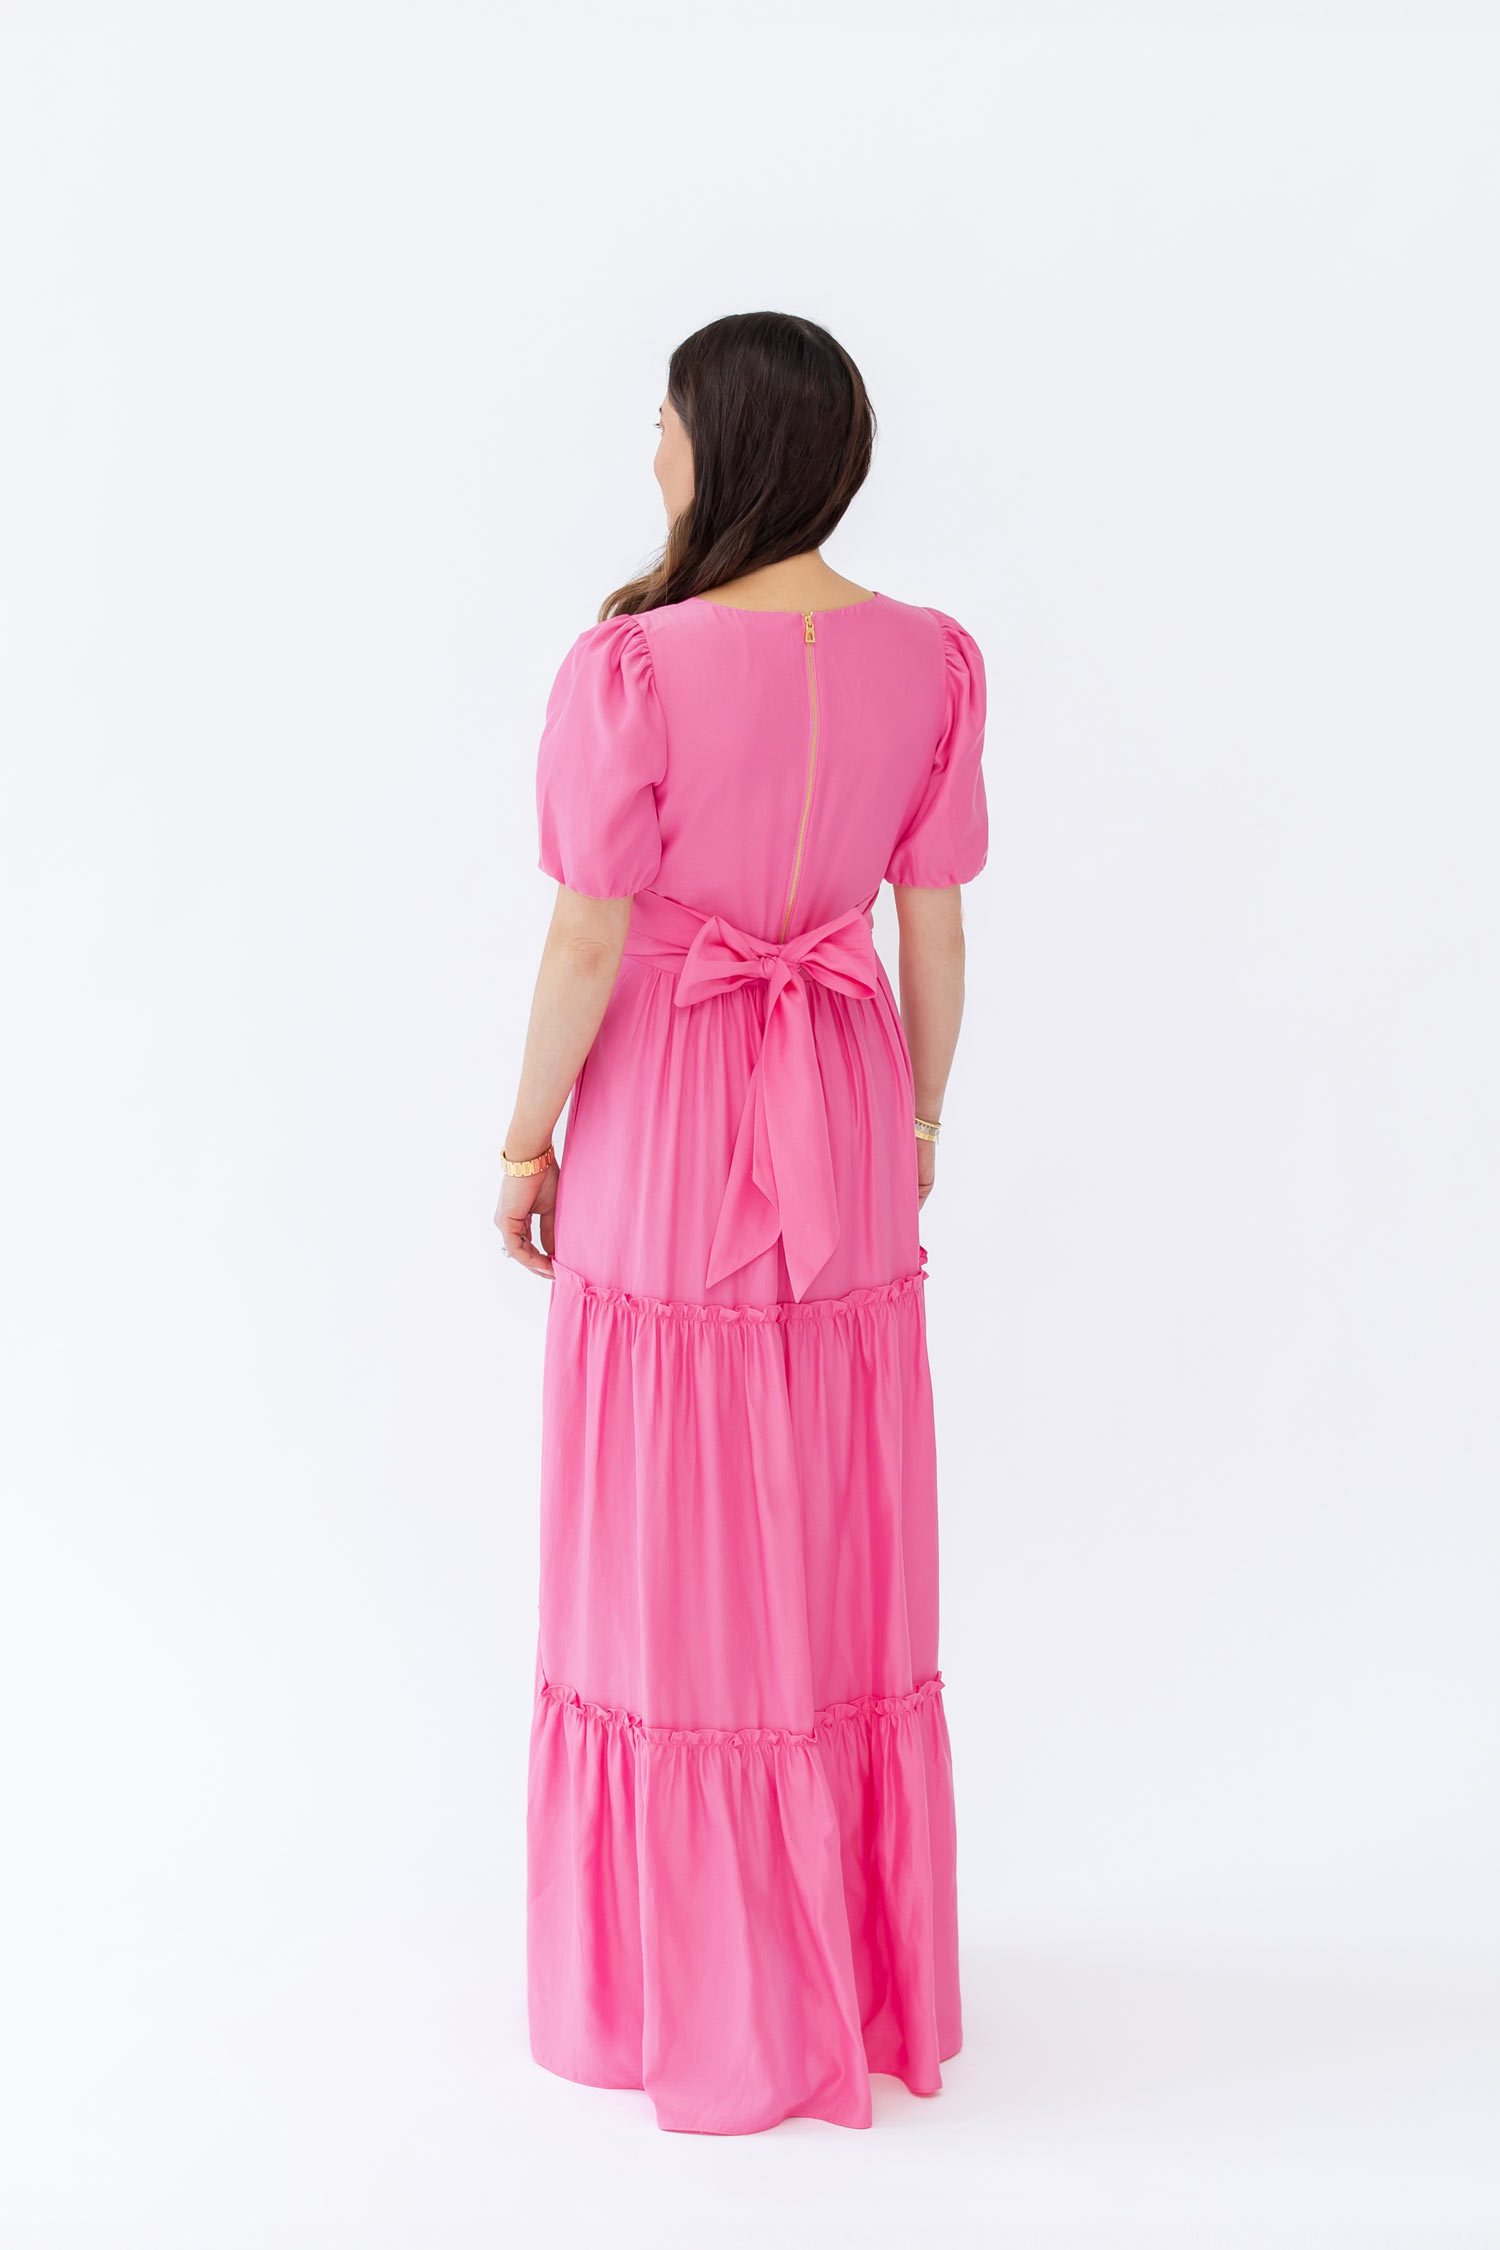 Sail to Sable Style Charade Pink Bow Back